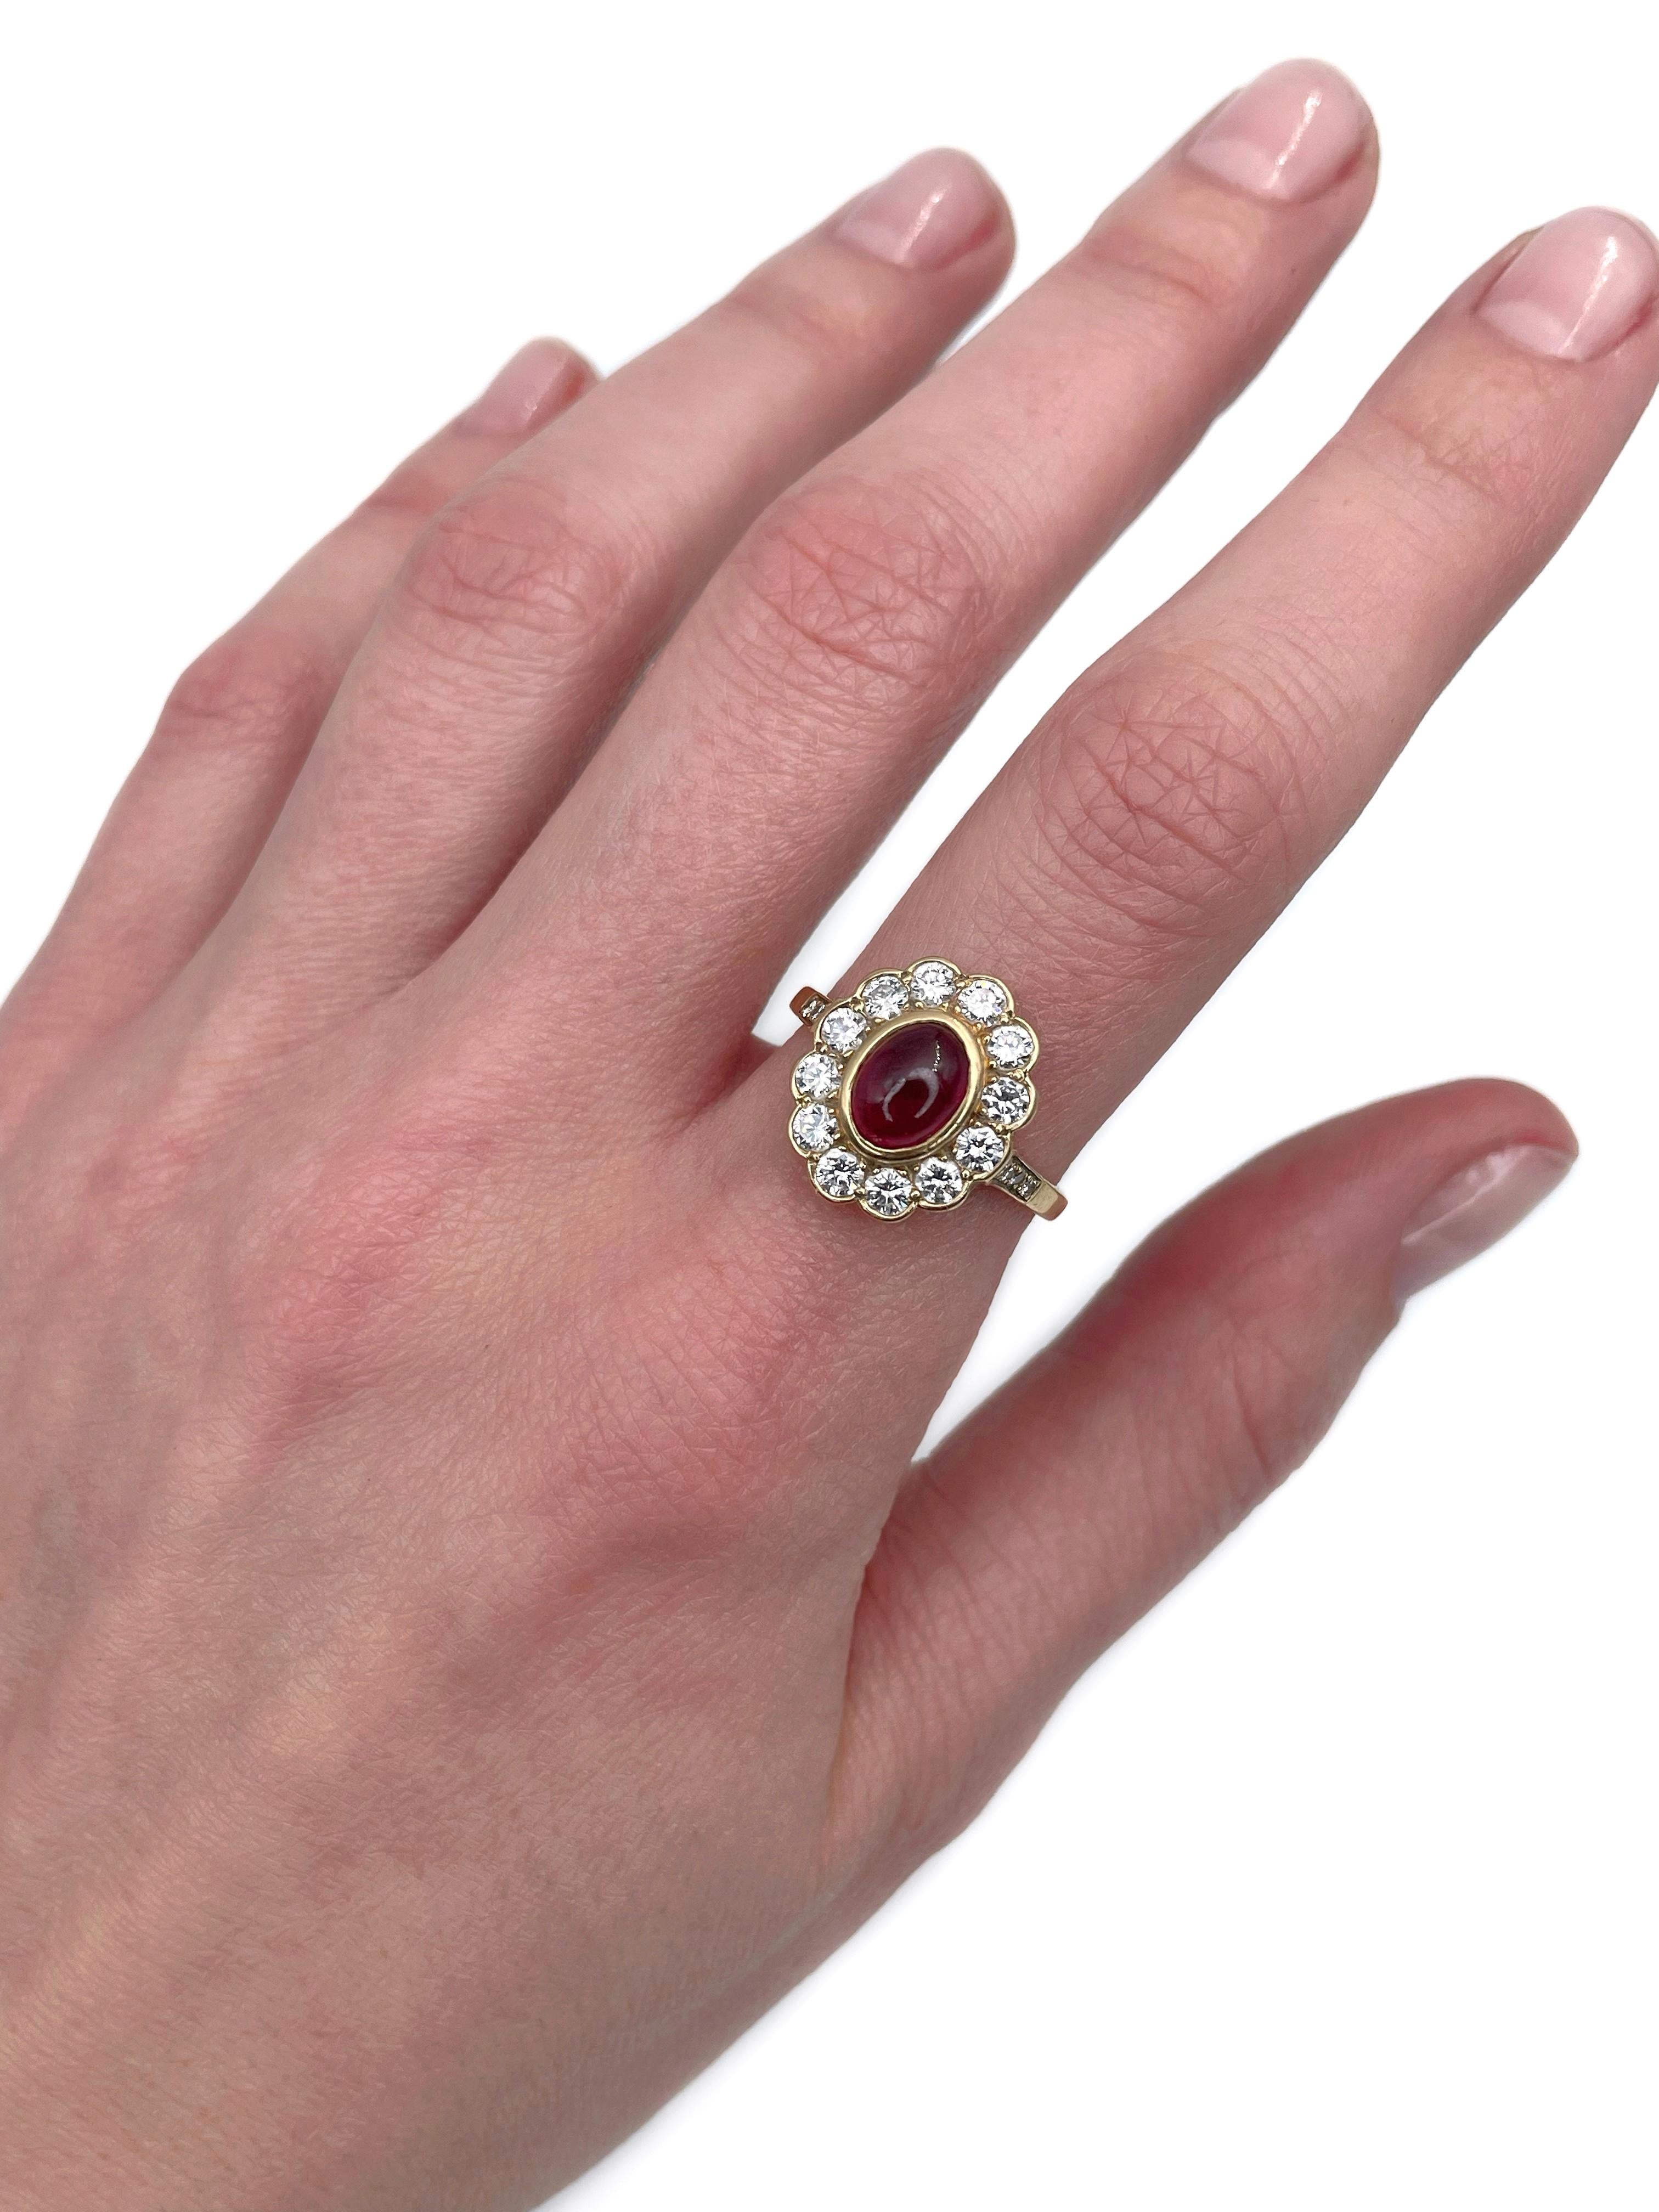 This is a vintage cluster ring crafted in 18K white gold. Circa 1970. 

The piece features:
- 1 ruby (oval cabochon cut, 1.90ct, slpR 6/4, SI)
- 20 diamonds (round brilliant cut, TW 1.00ct, RW+/W, VS-SI)

The ball inside the shank keeps the ring